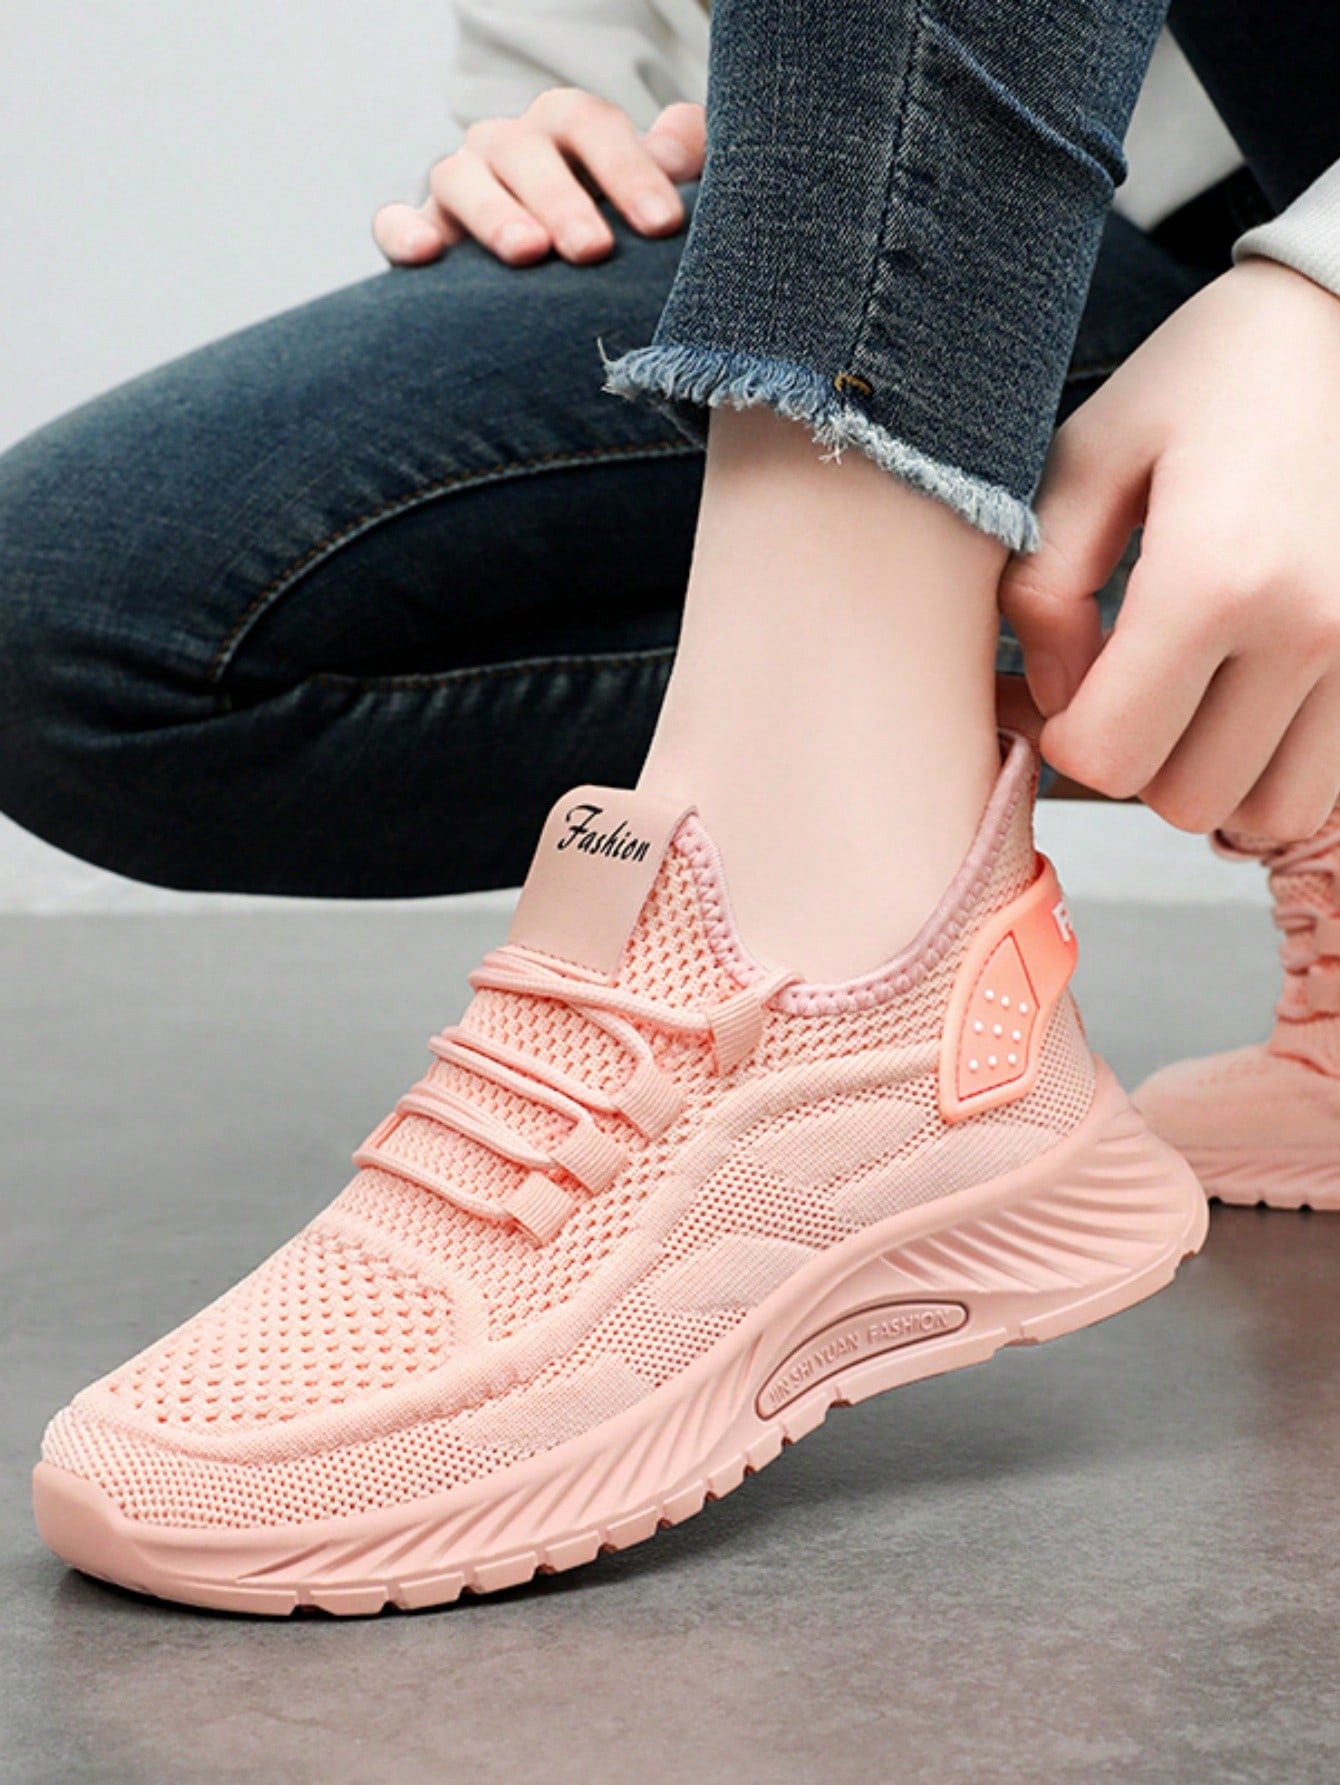 Women's Lightweight Shock-Absorbing Slip-Resistant Soft Bottom Mesh Breathable Hook Knitting Running Shoes, Casual Sports Shoes, Sneakers, Walking Shoes For All Seasons-Pink-1